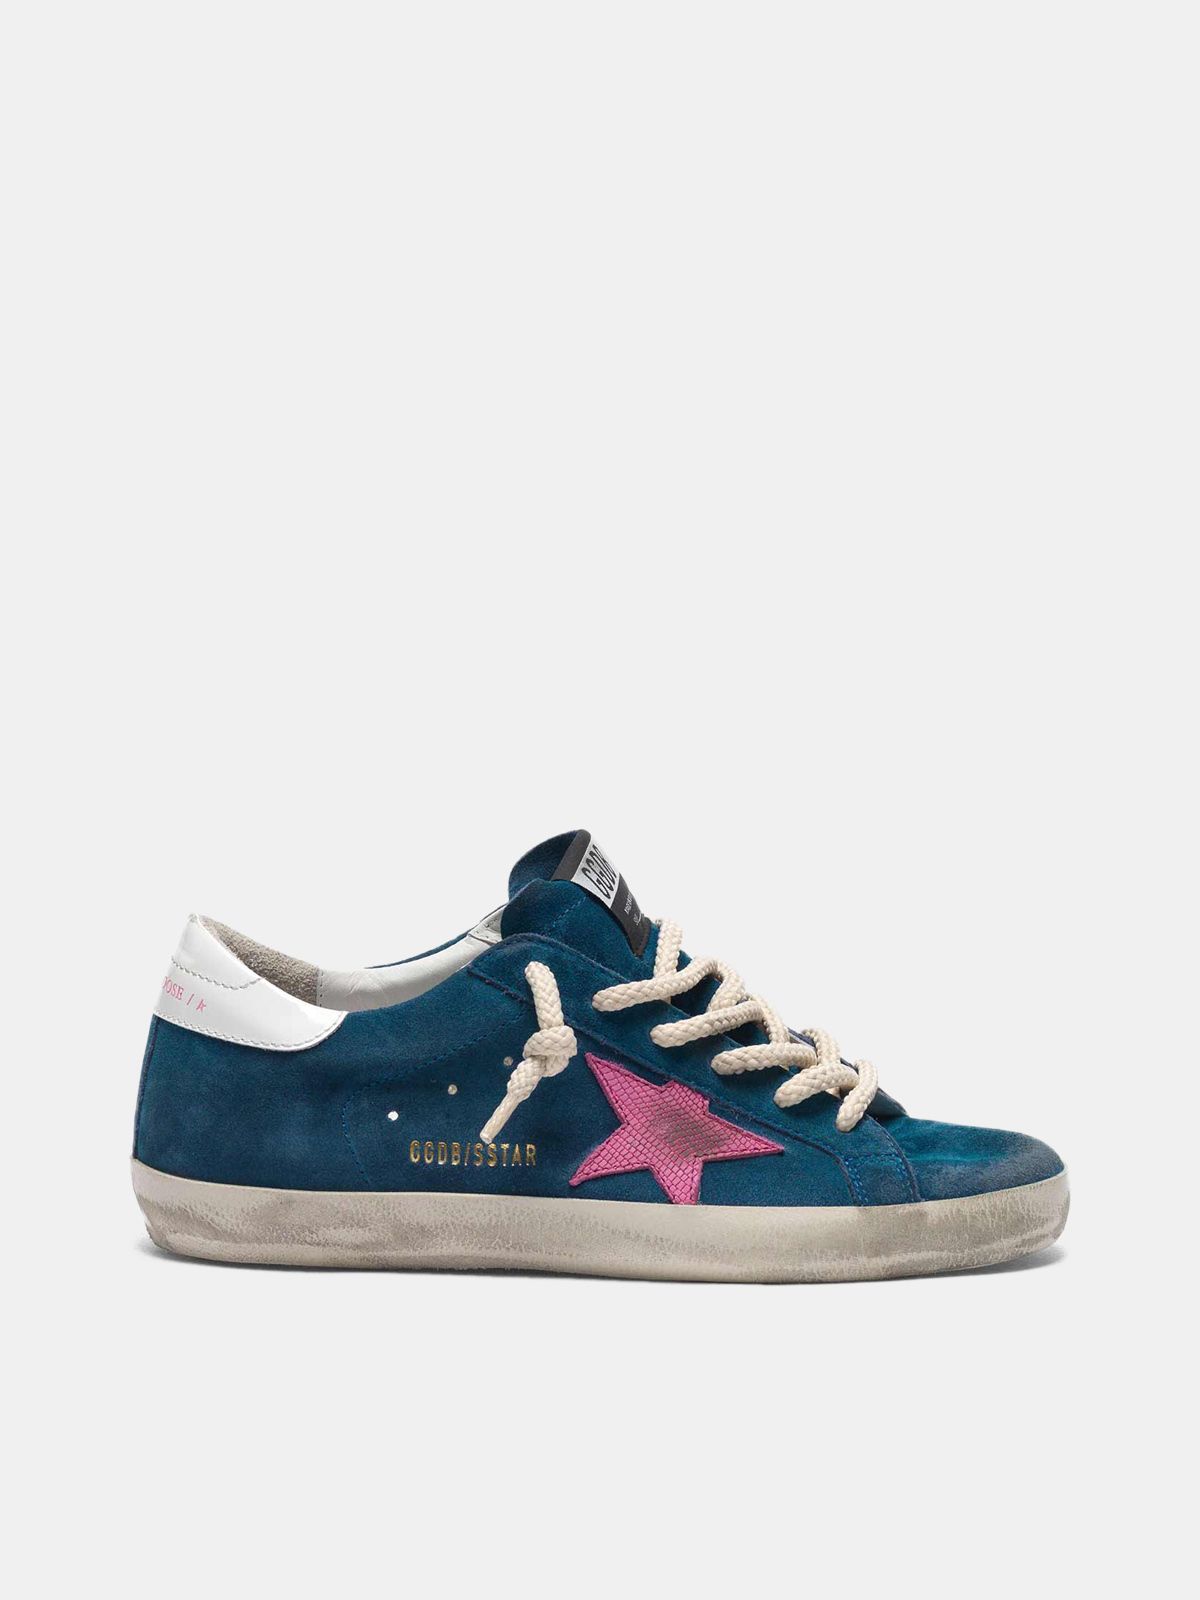 Super-Star sneakers in blue suede with a pink star | 